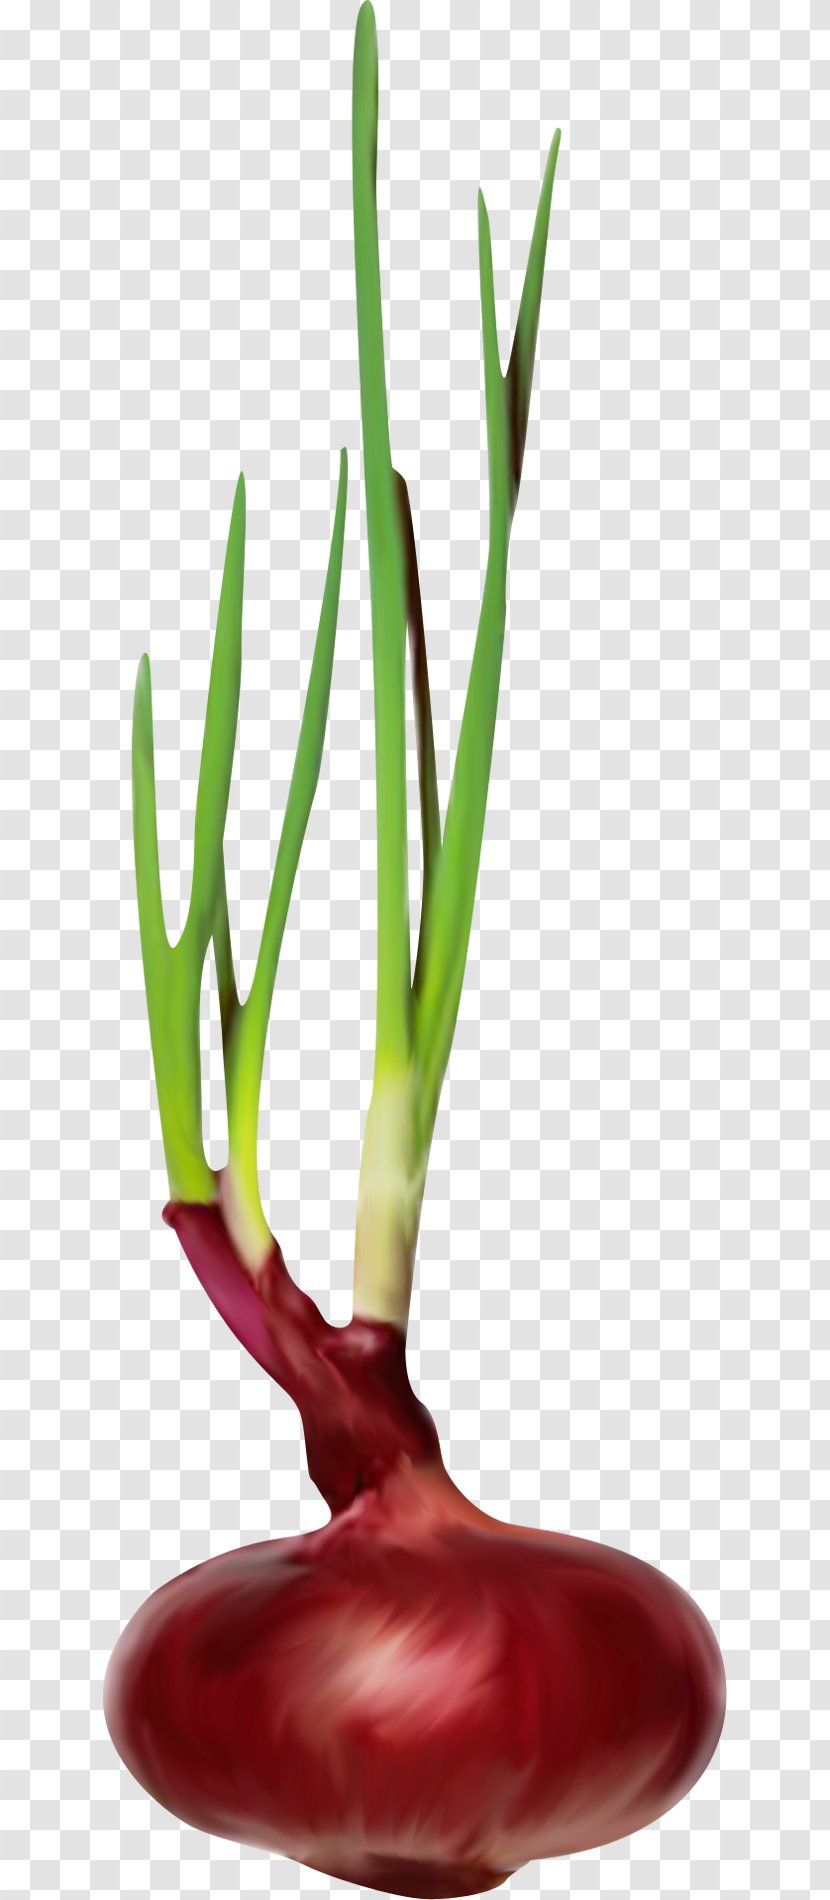 Onion Chili Pepper Scallion - Green Leaves Transparent PNG